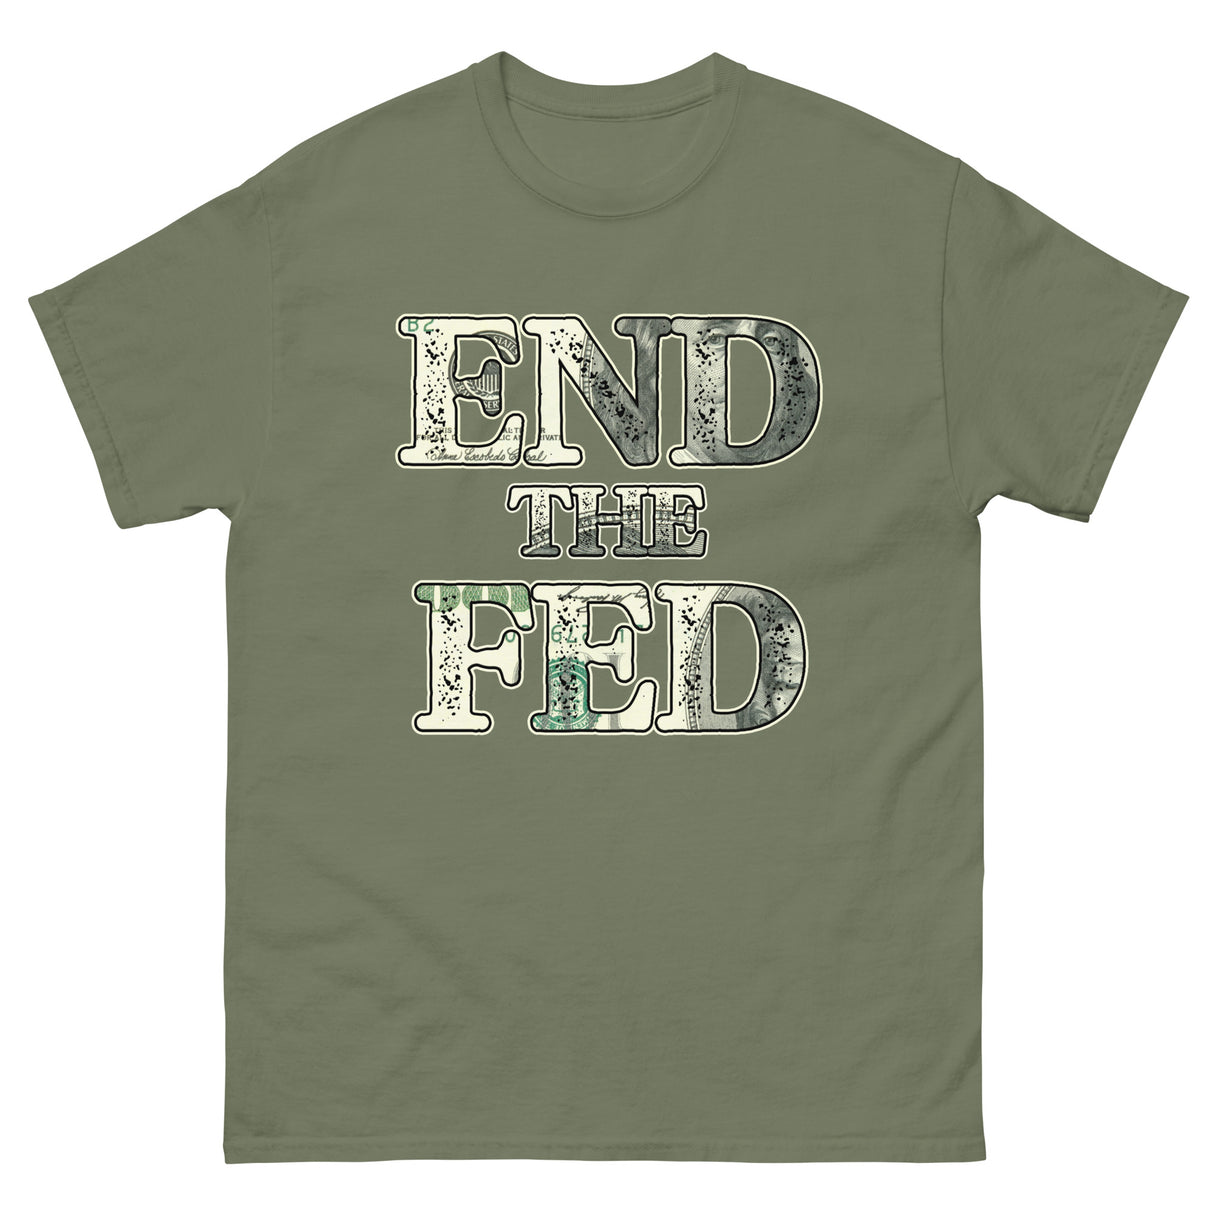 End The Fed Heavy Cotton Shirt - Libertarian Country